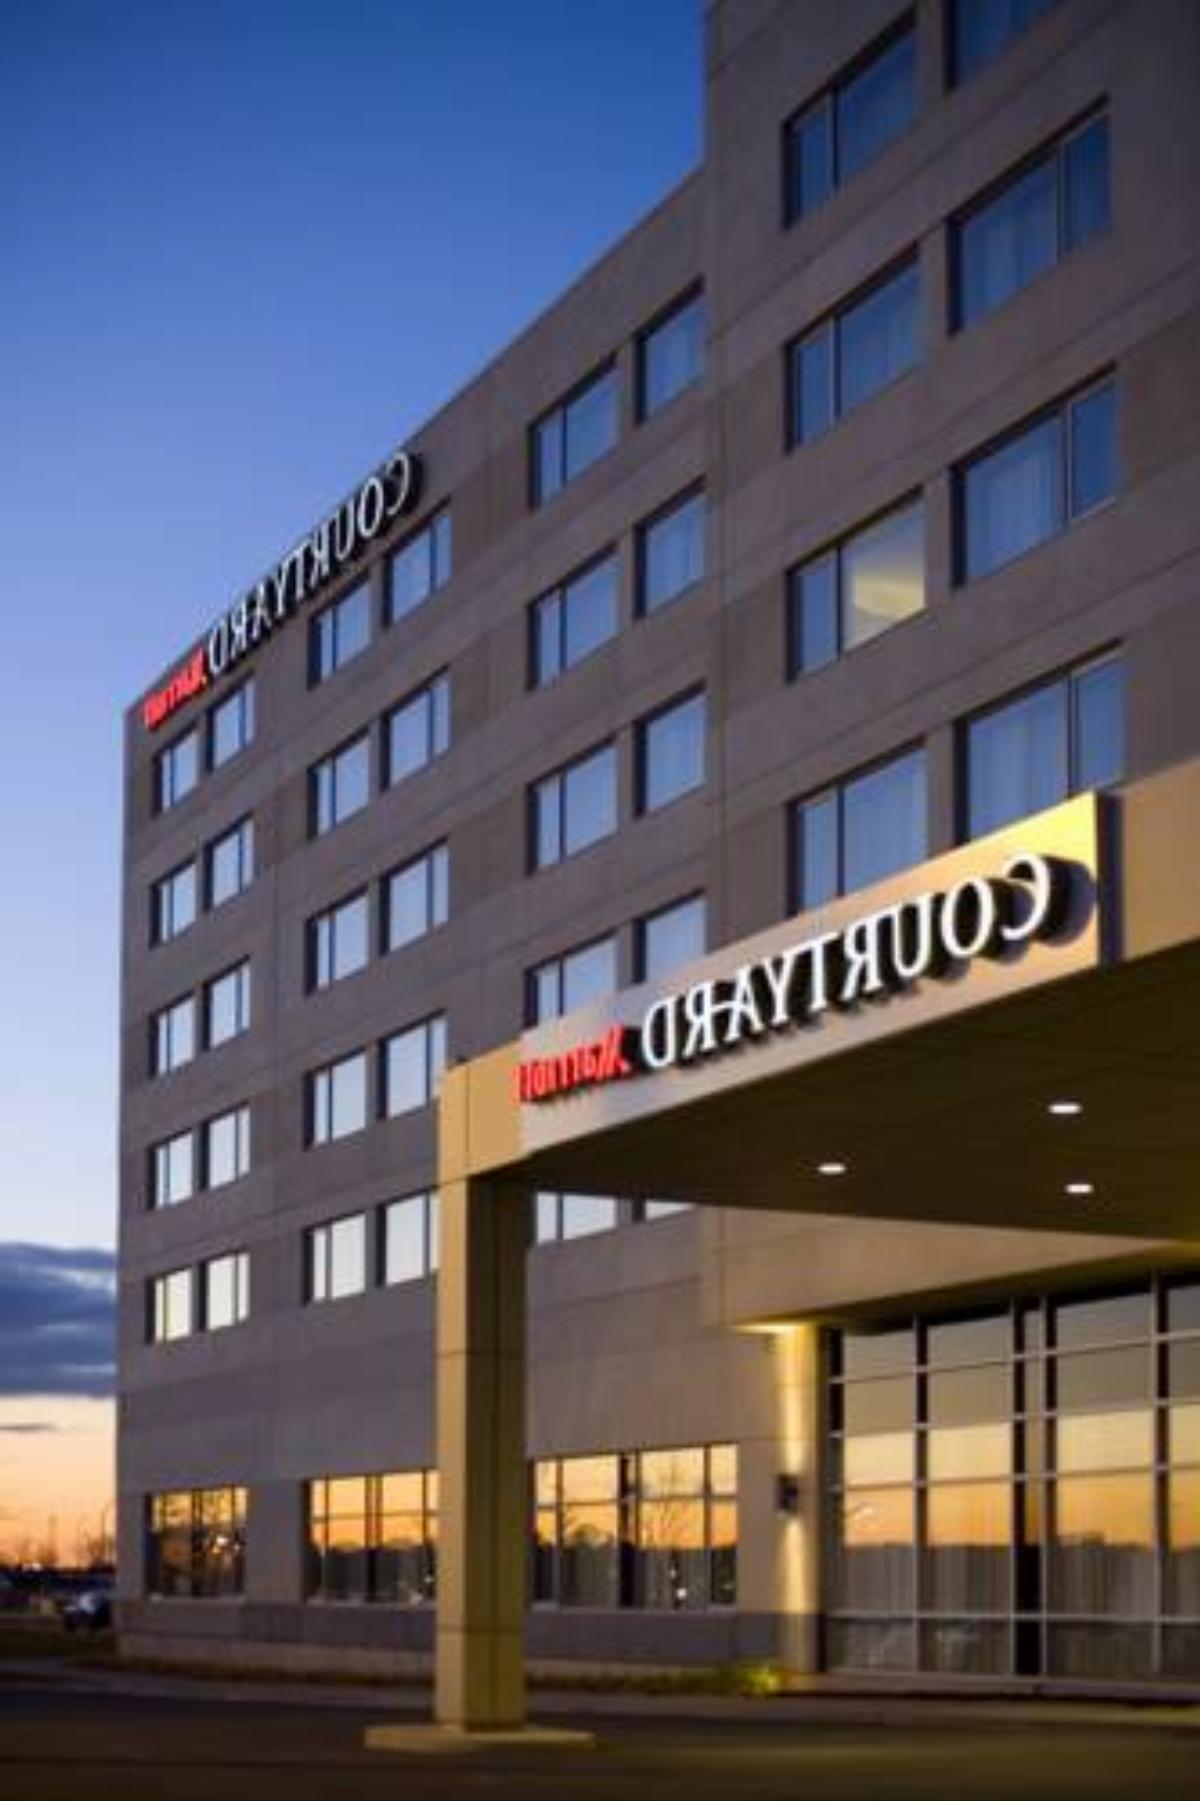 Courtyard by Marriott Montreal Airport Hotel Dorval Canada